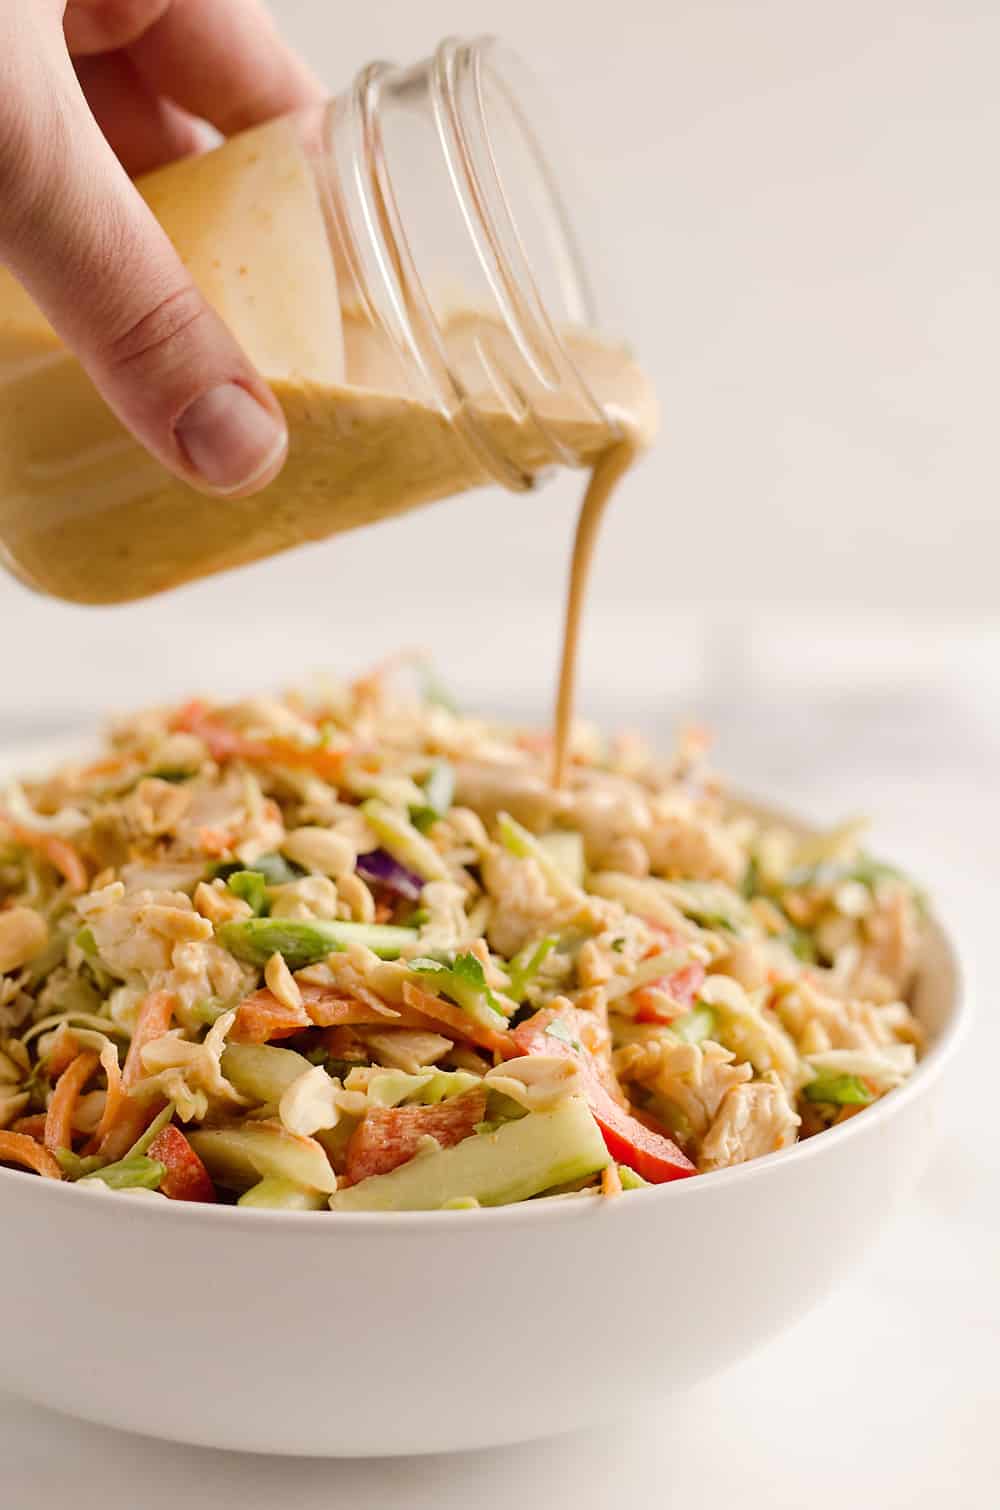 Thai Peanut Chicken Crunch Slaw Salad is an easy & healthy cold salad that is loaded with fresh flavor and crunch! Coleslaw and broccoli slaw are tossed with cucumbers, carrots, bell peppers and chicken and dressed with a homemade Thai Peanut Sauce for a hearty serving of vegetables in a salad you will love.